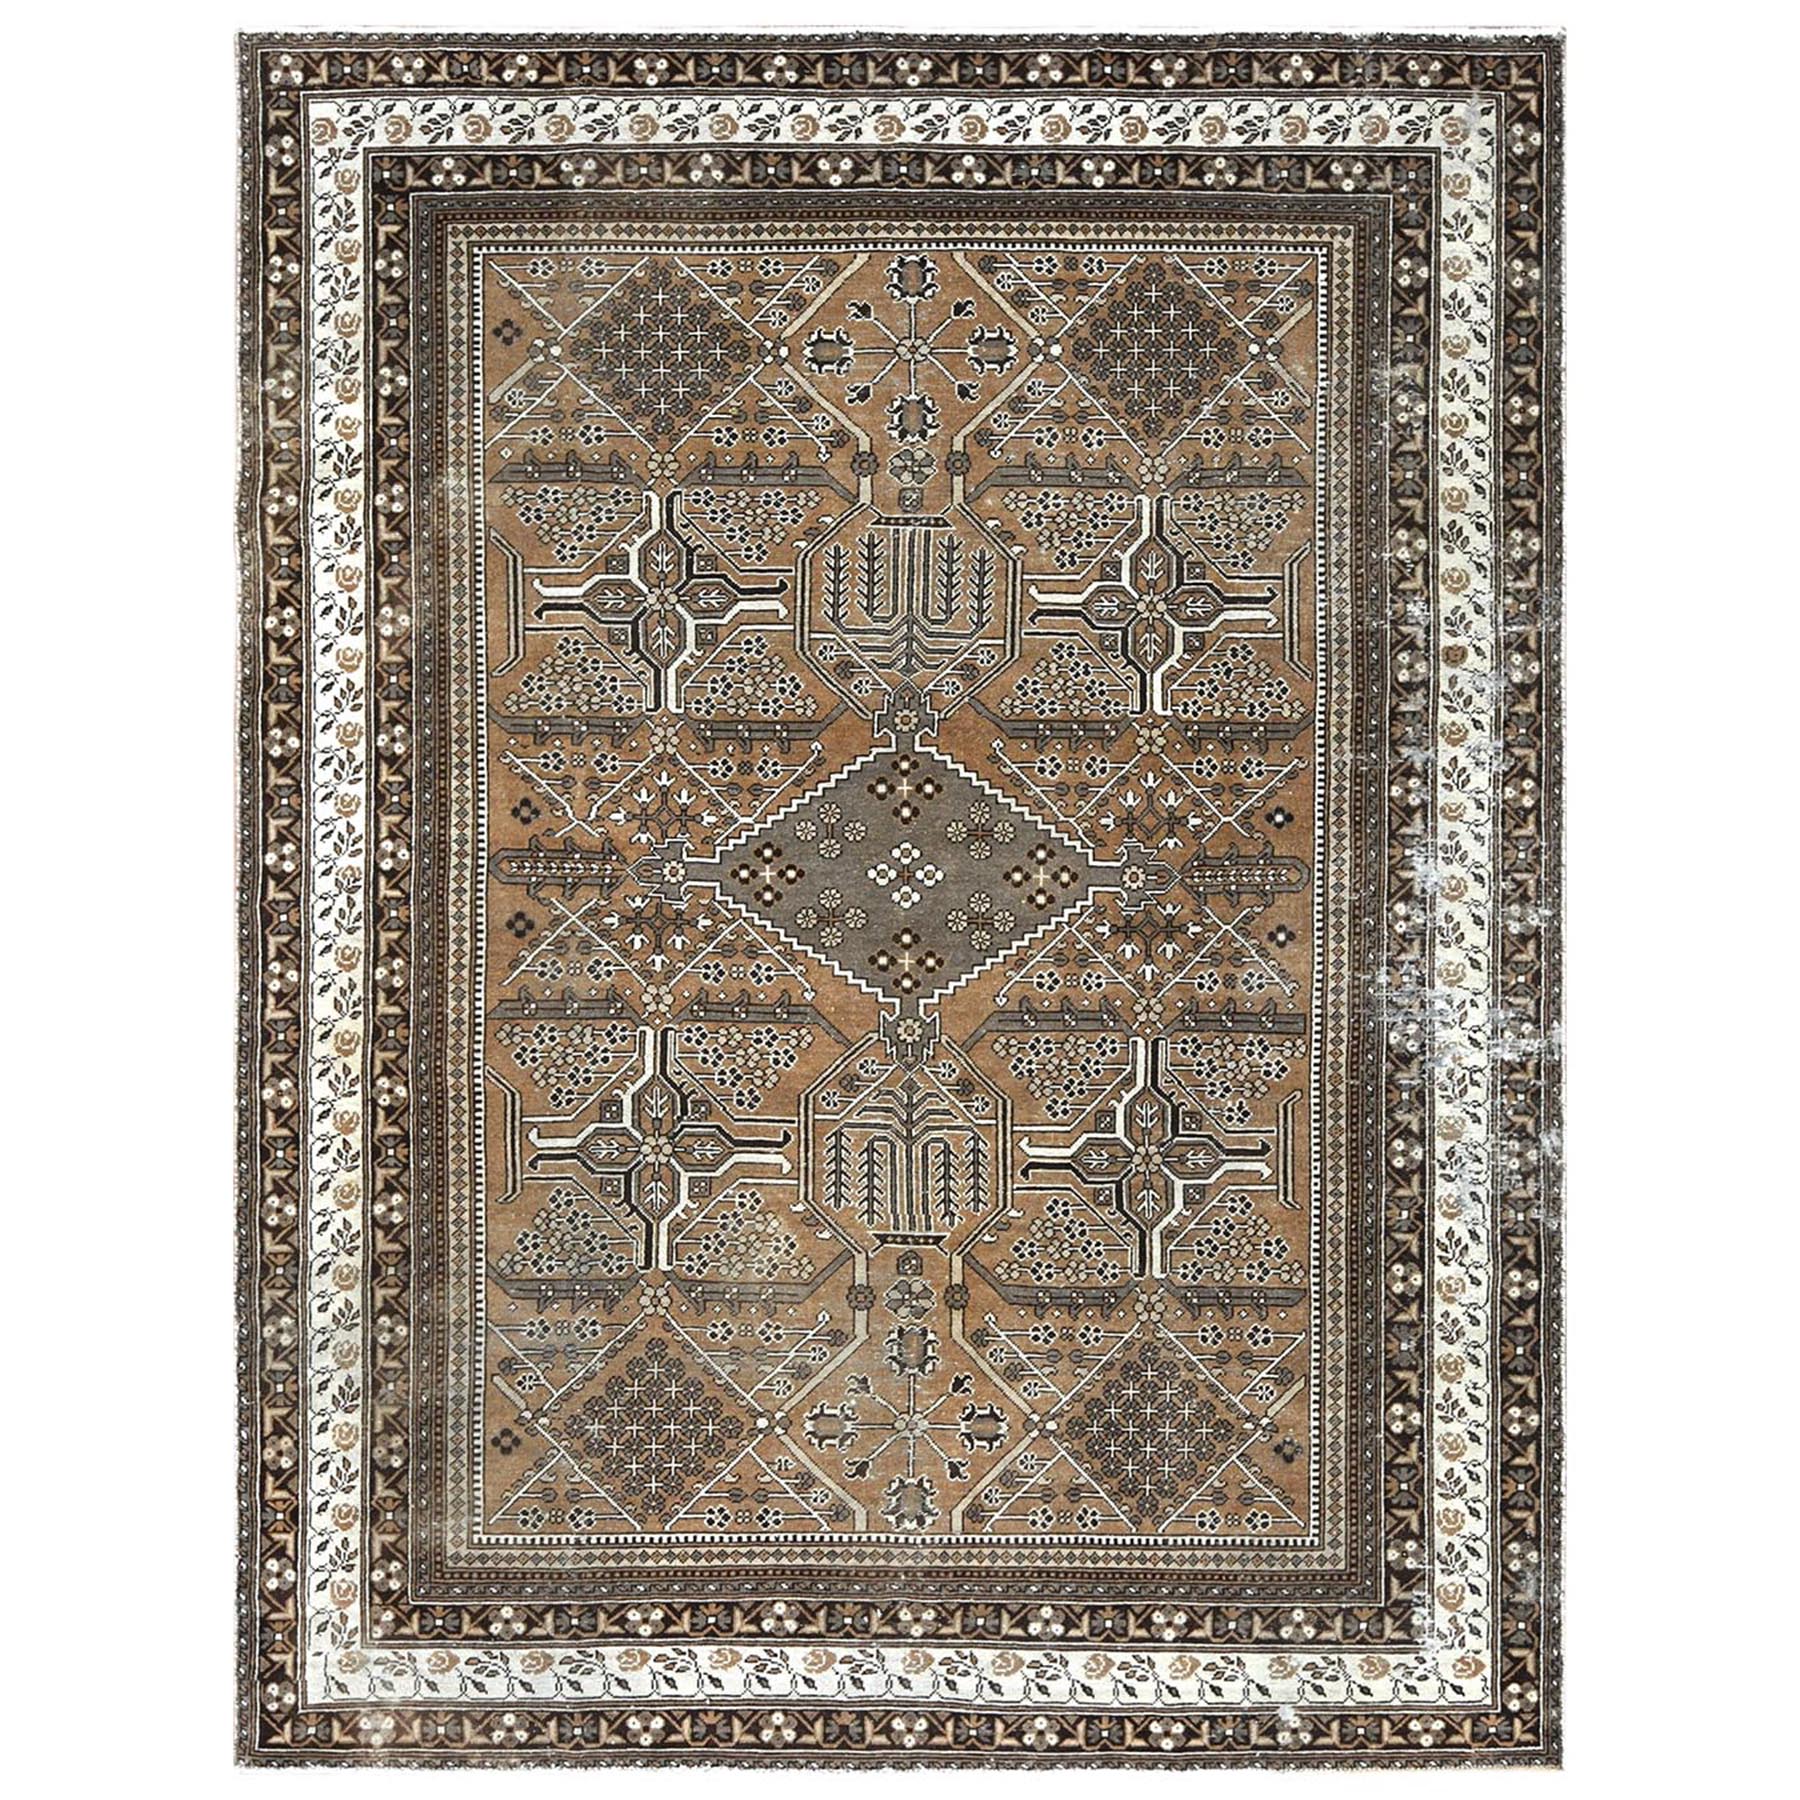 8'4"x11' Mocha Brown, Vintage Persian Bakhtiar with Undyed Natural Wool, Sheared Low, Distressed Look, Worn Down, Clean, Hand Woven, Oriental Rug 